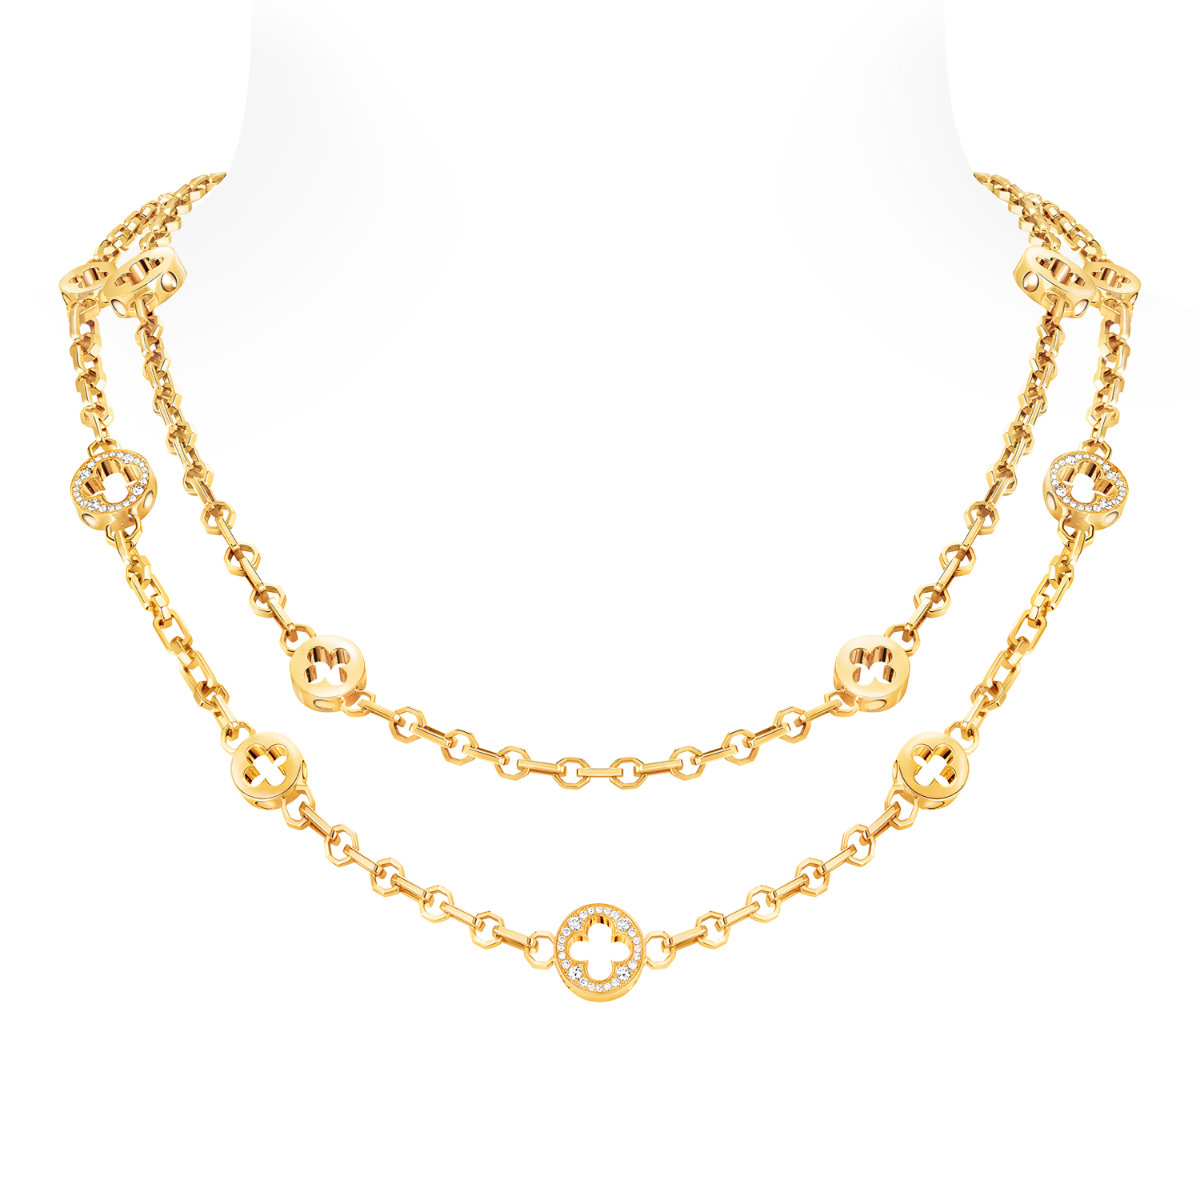 Louis Vuitton: New Creations In Louis Vuitton Empreinte Jewellery Collection  - Luxferity